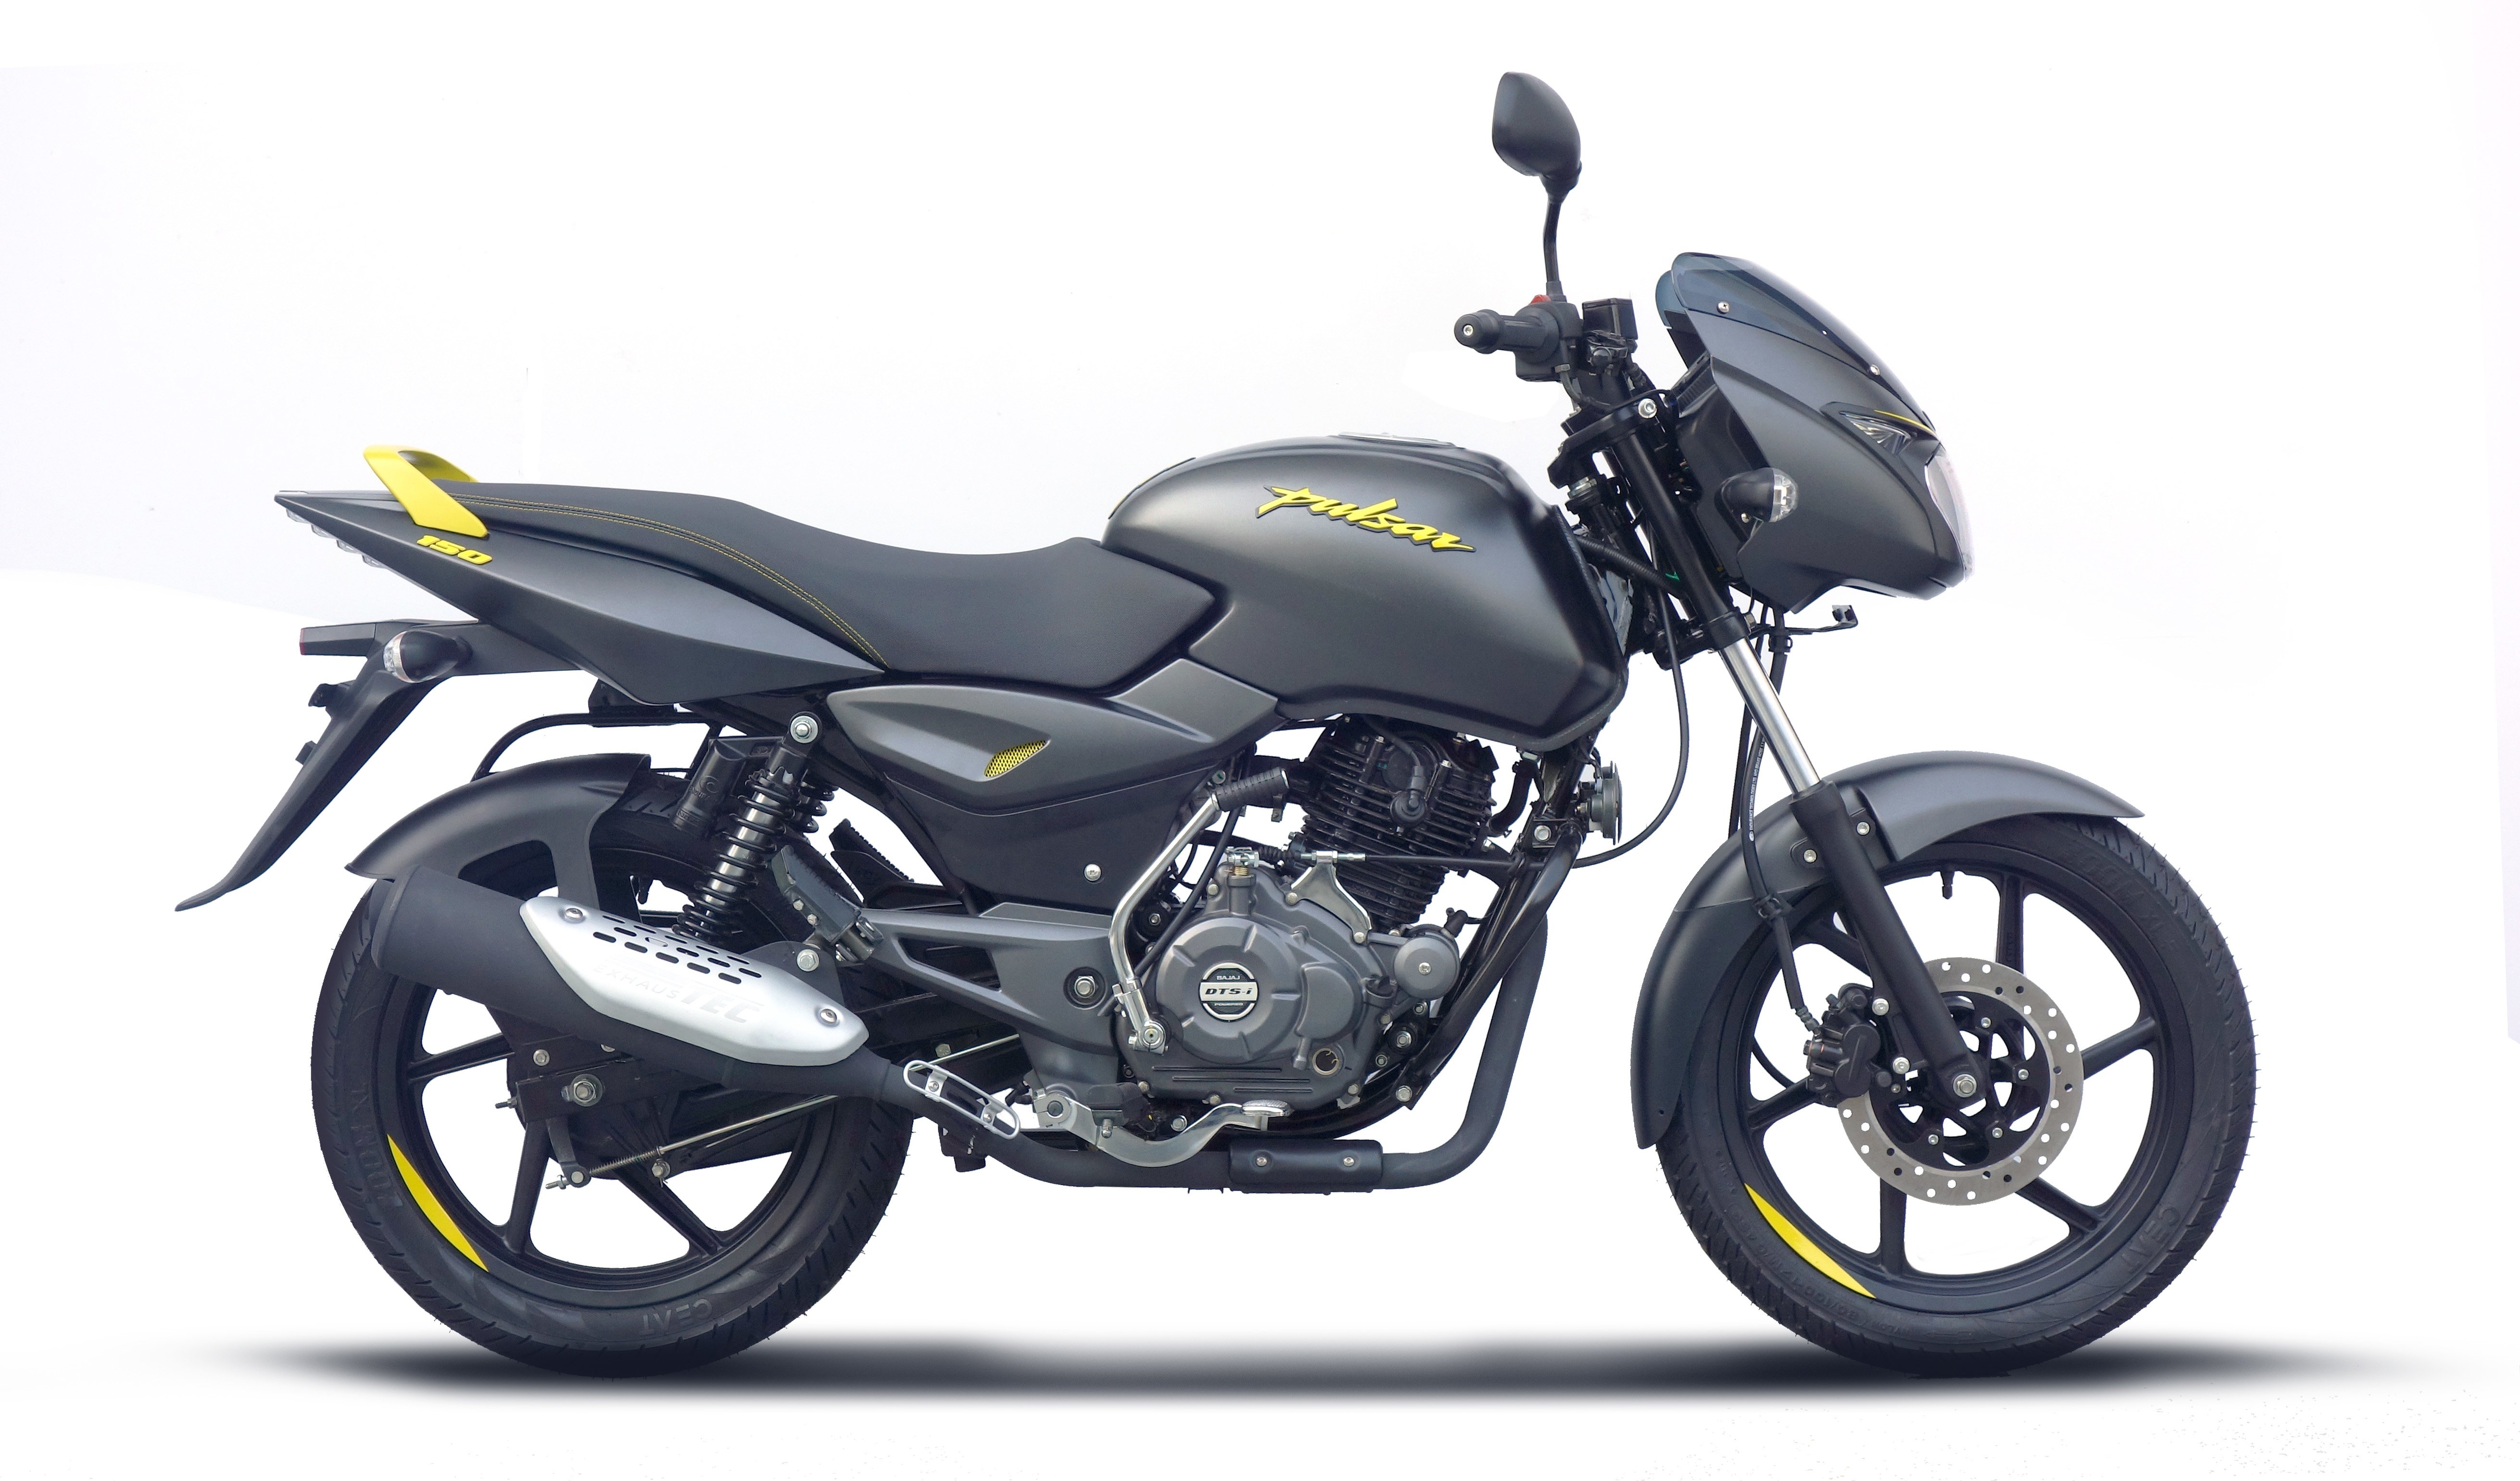 Bajaj Pulsar 125 Price And Engine Specs Expectations In India